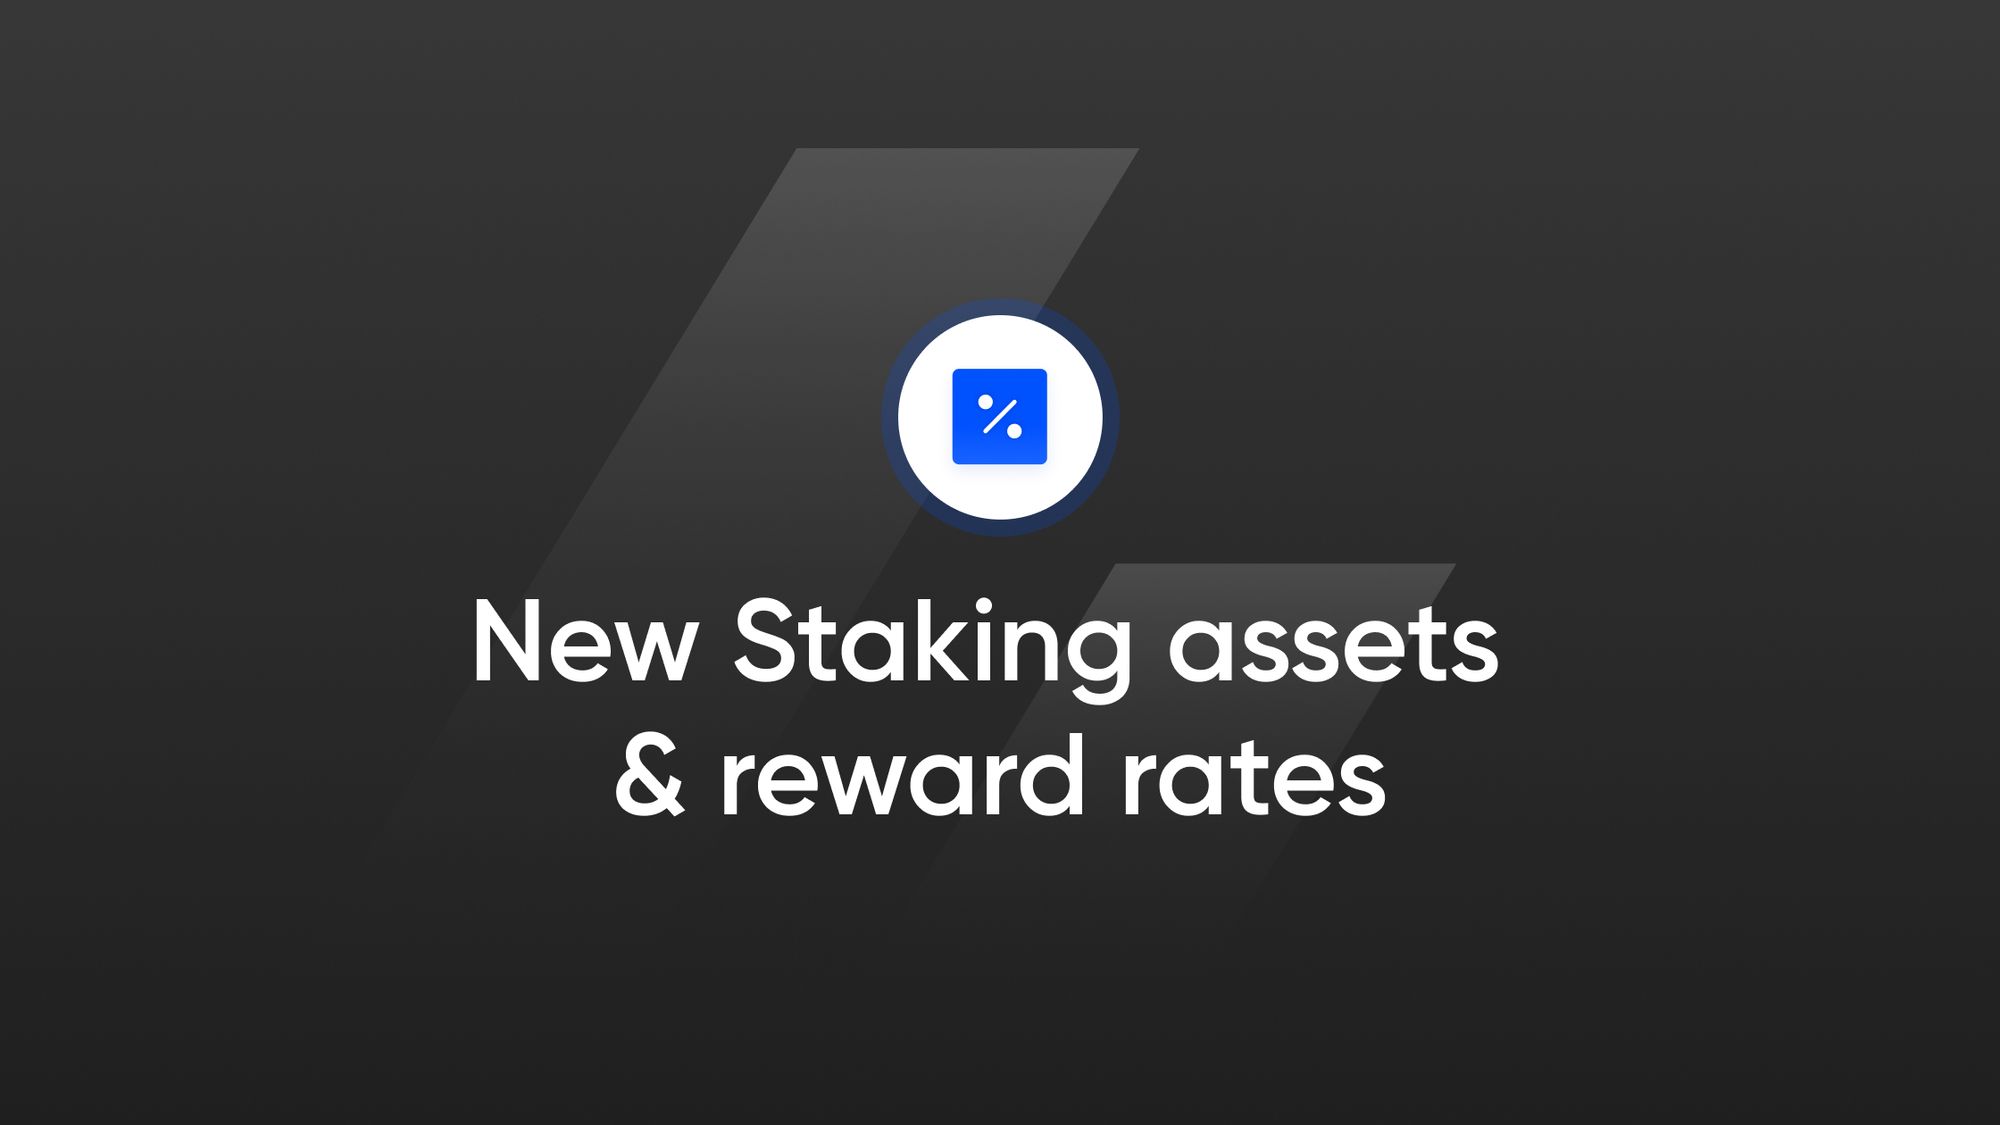 New Staking assets & reward rates